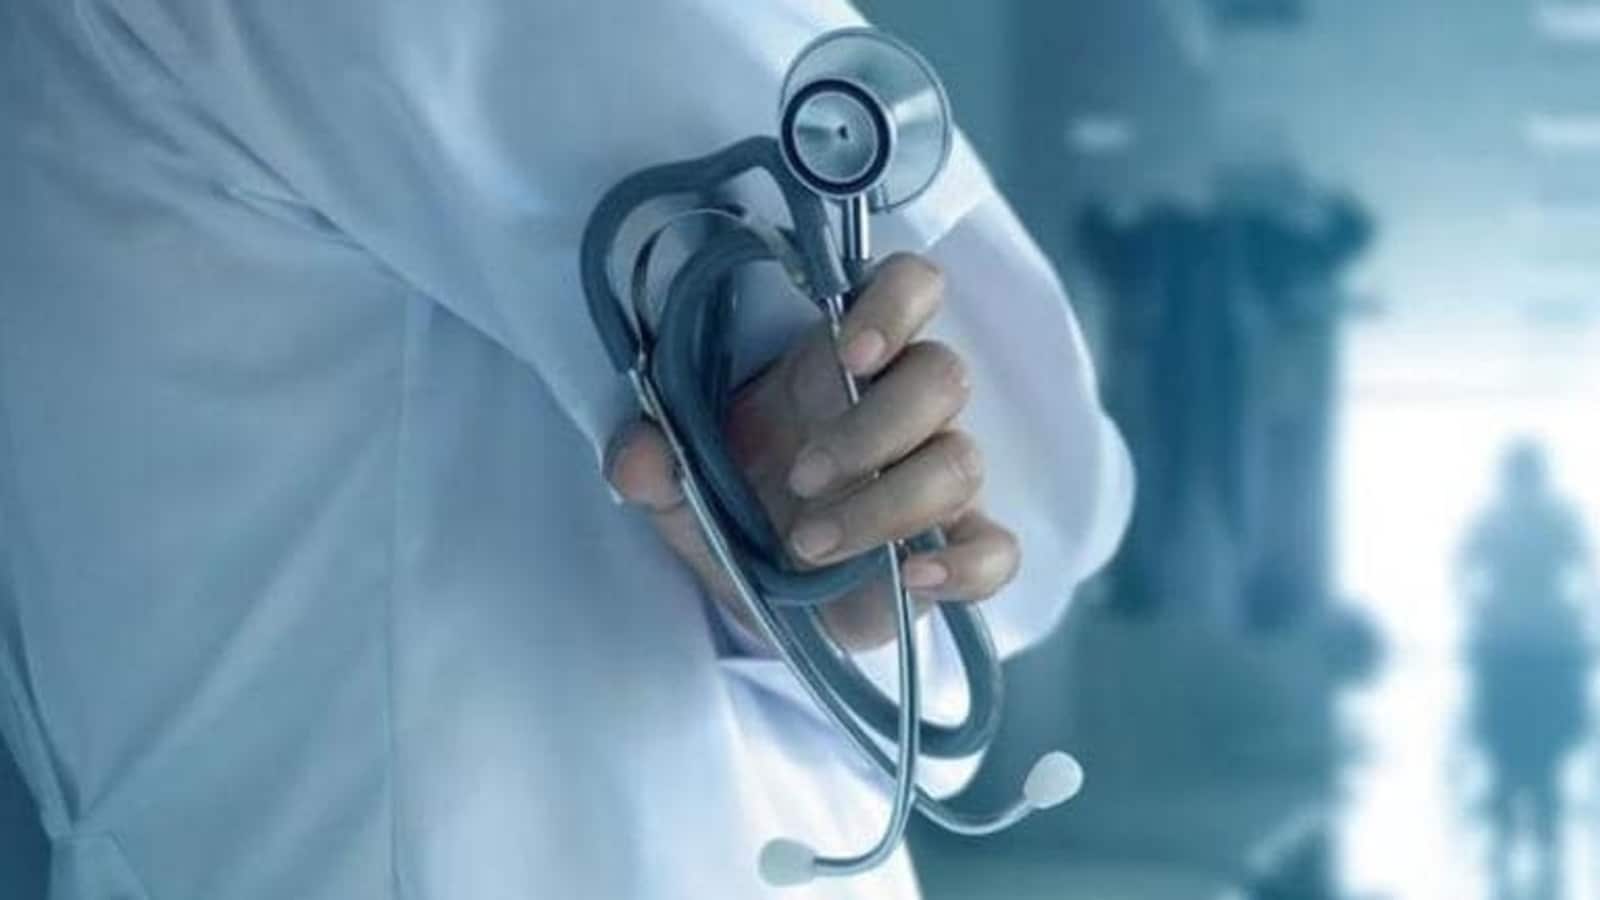 Delhi Doctors Teased Attacked Over Covid Spread On Eve Of